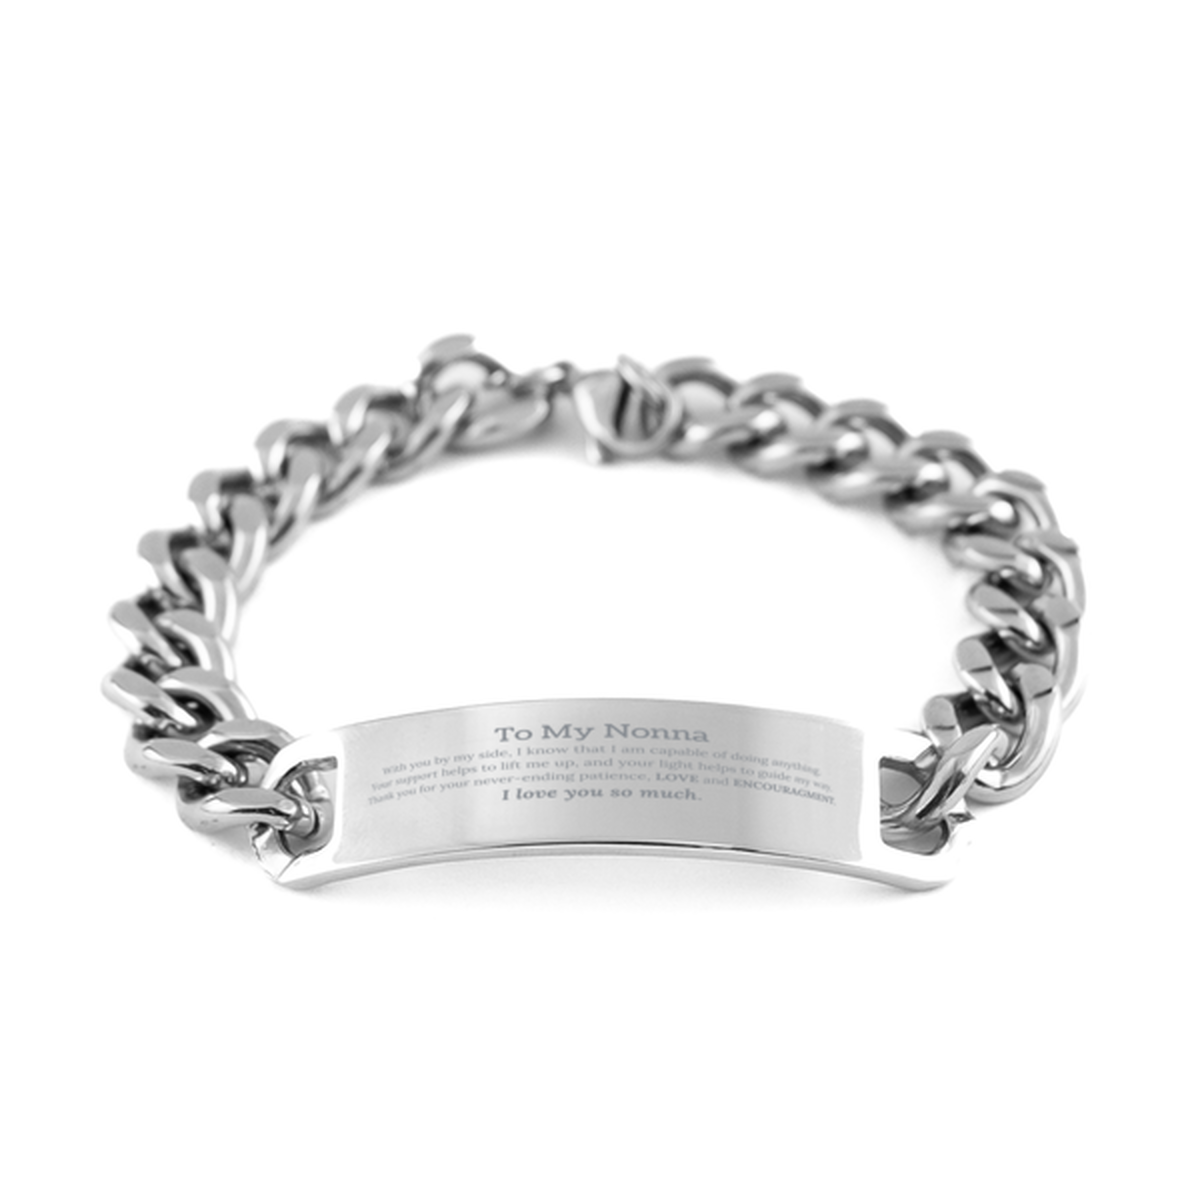 Appreciation Nonna Cuban Chain Stainless Steel Bracelet Gifts, To My Nonna Birthday Christmas Wedding Keepsake Gifts for Nonna With you by my side, I know that I am capable of doing anything. I love you so much